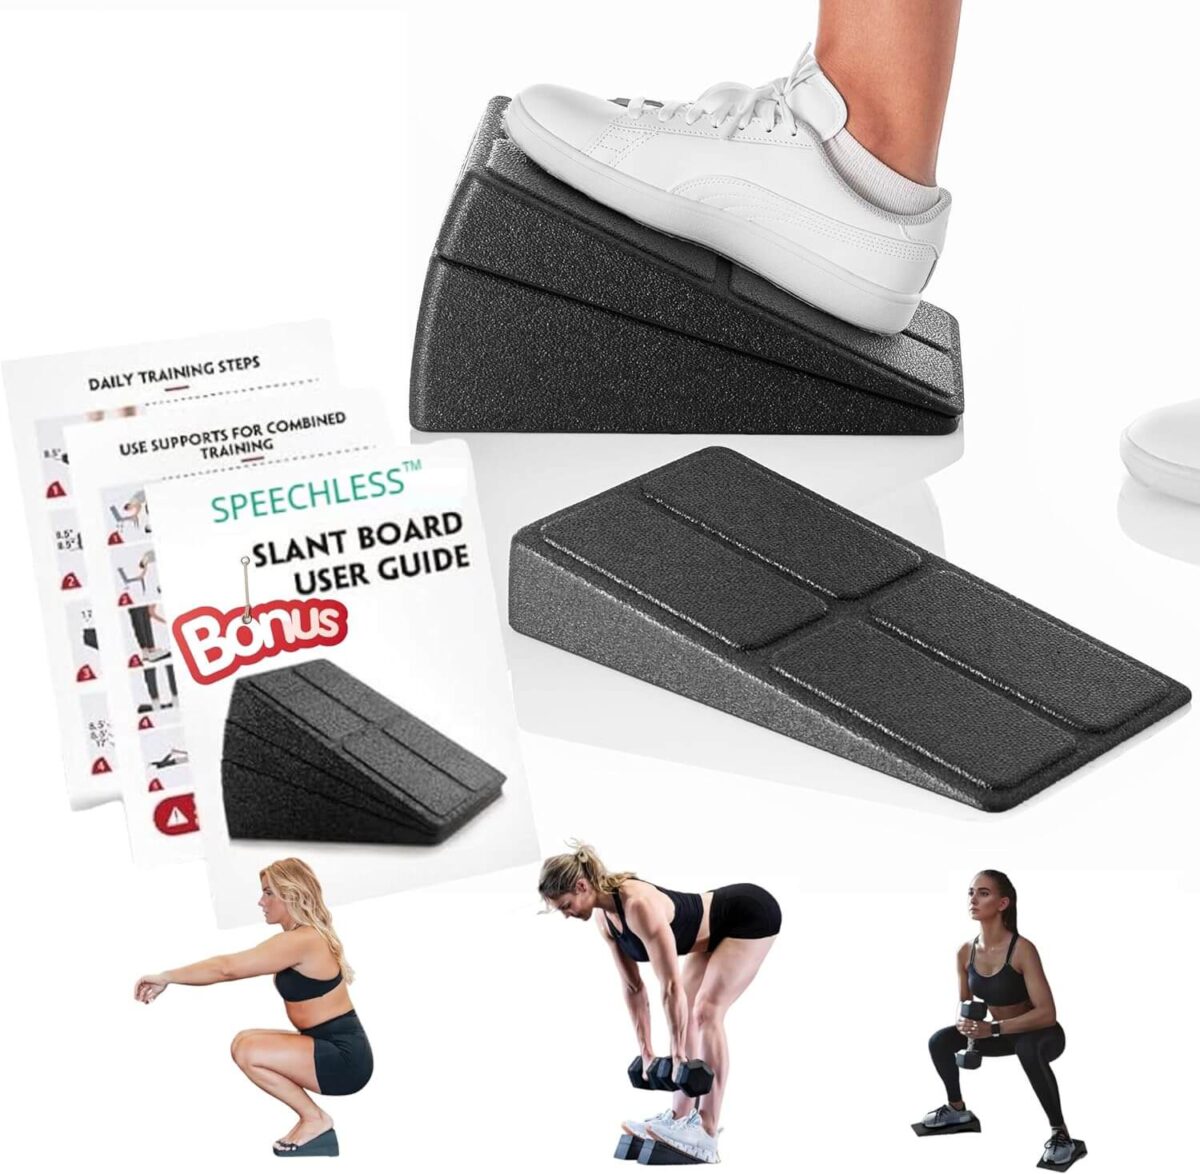 Featured Image for Foot Stretcher for Physical Home Therapy 3 Pcs Stretch Equipment for Squat Ankle Incline Foam Boards Wedge Calve Raise Blocks Squat Wedge Block Adjustable Slant Board for Calf Stretching